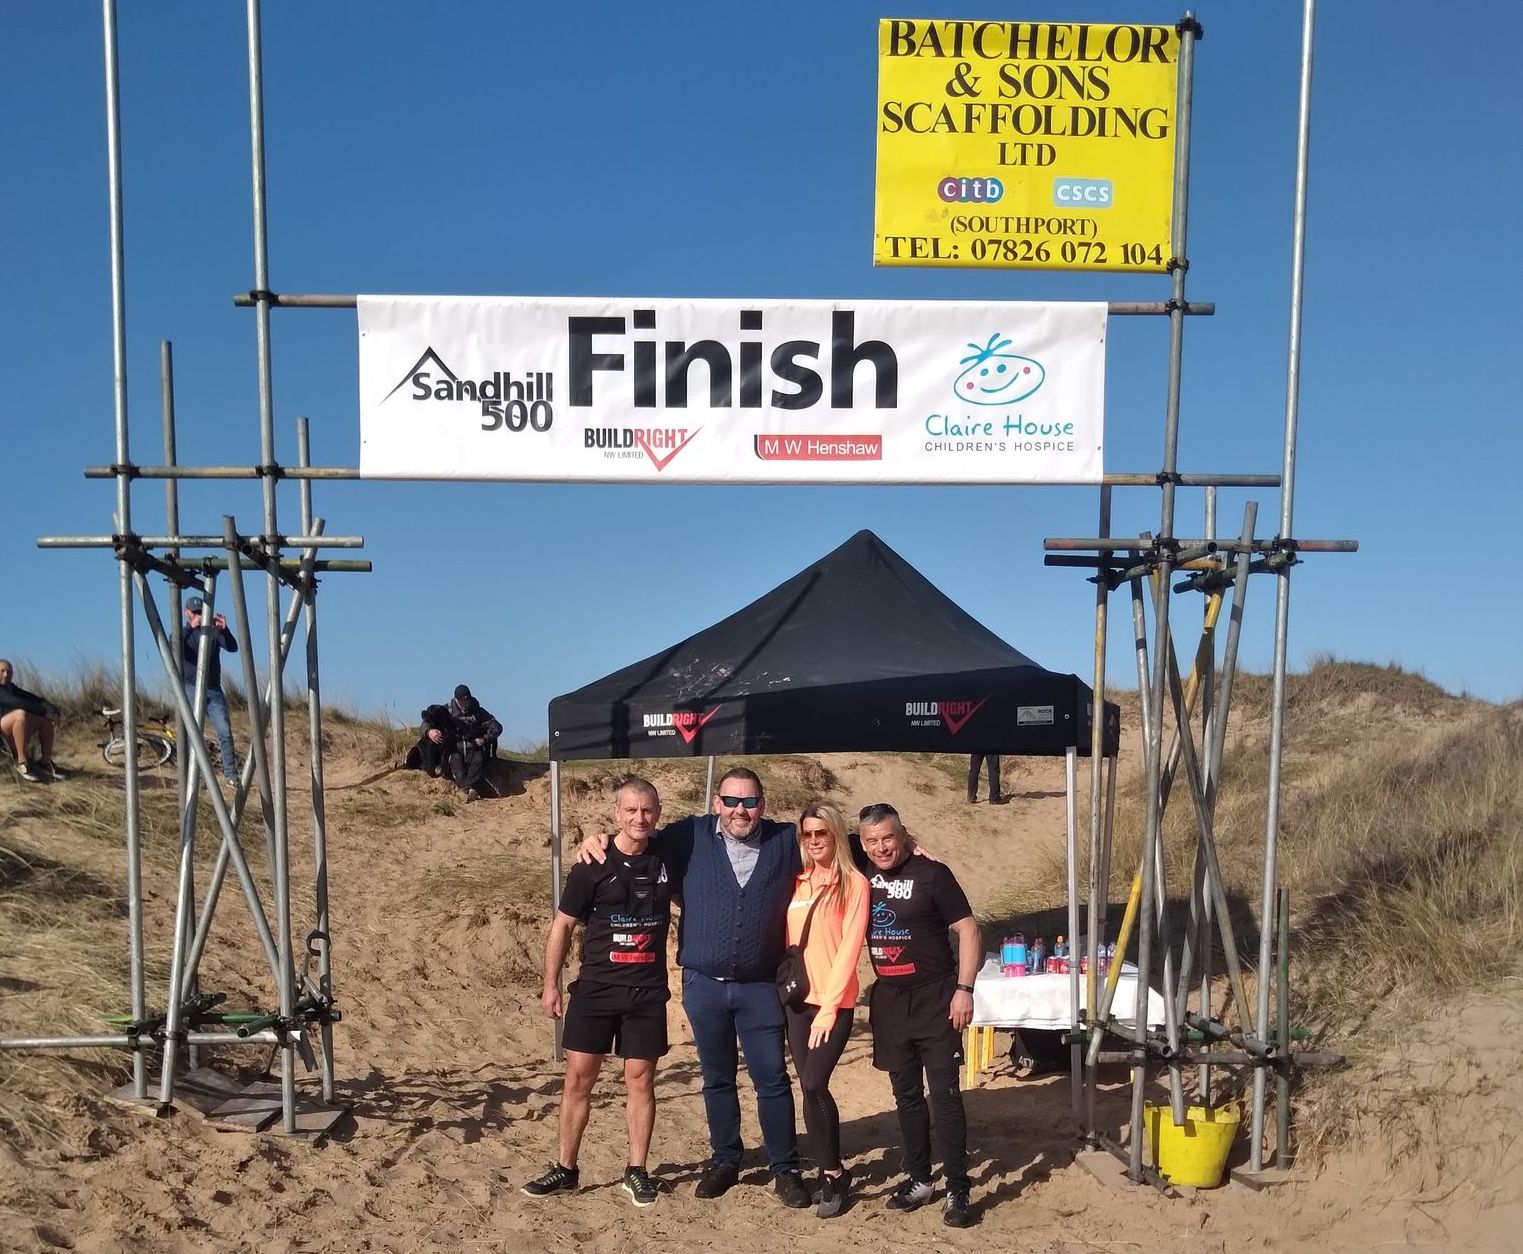 Jonny Johnstone and Colin Reilly completed the Sandhill 500 in Southport to raise thousands of pounds for Claire House childrens hospice in Wirral